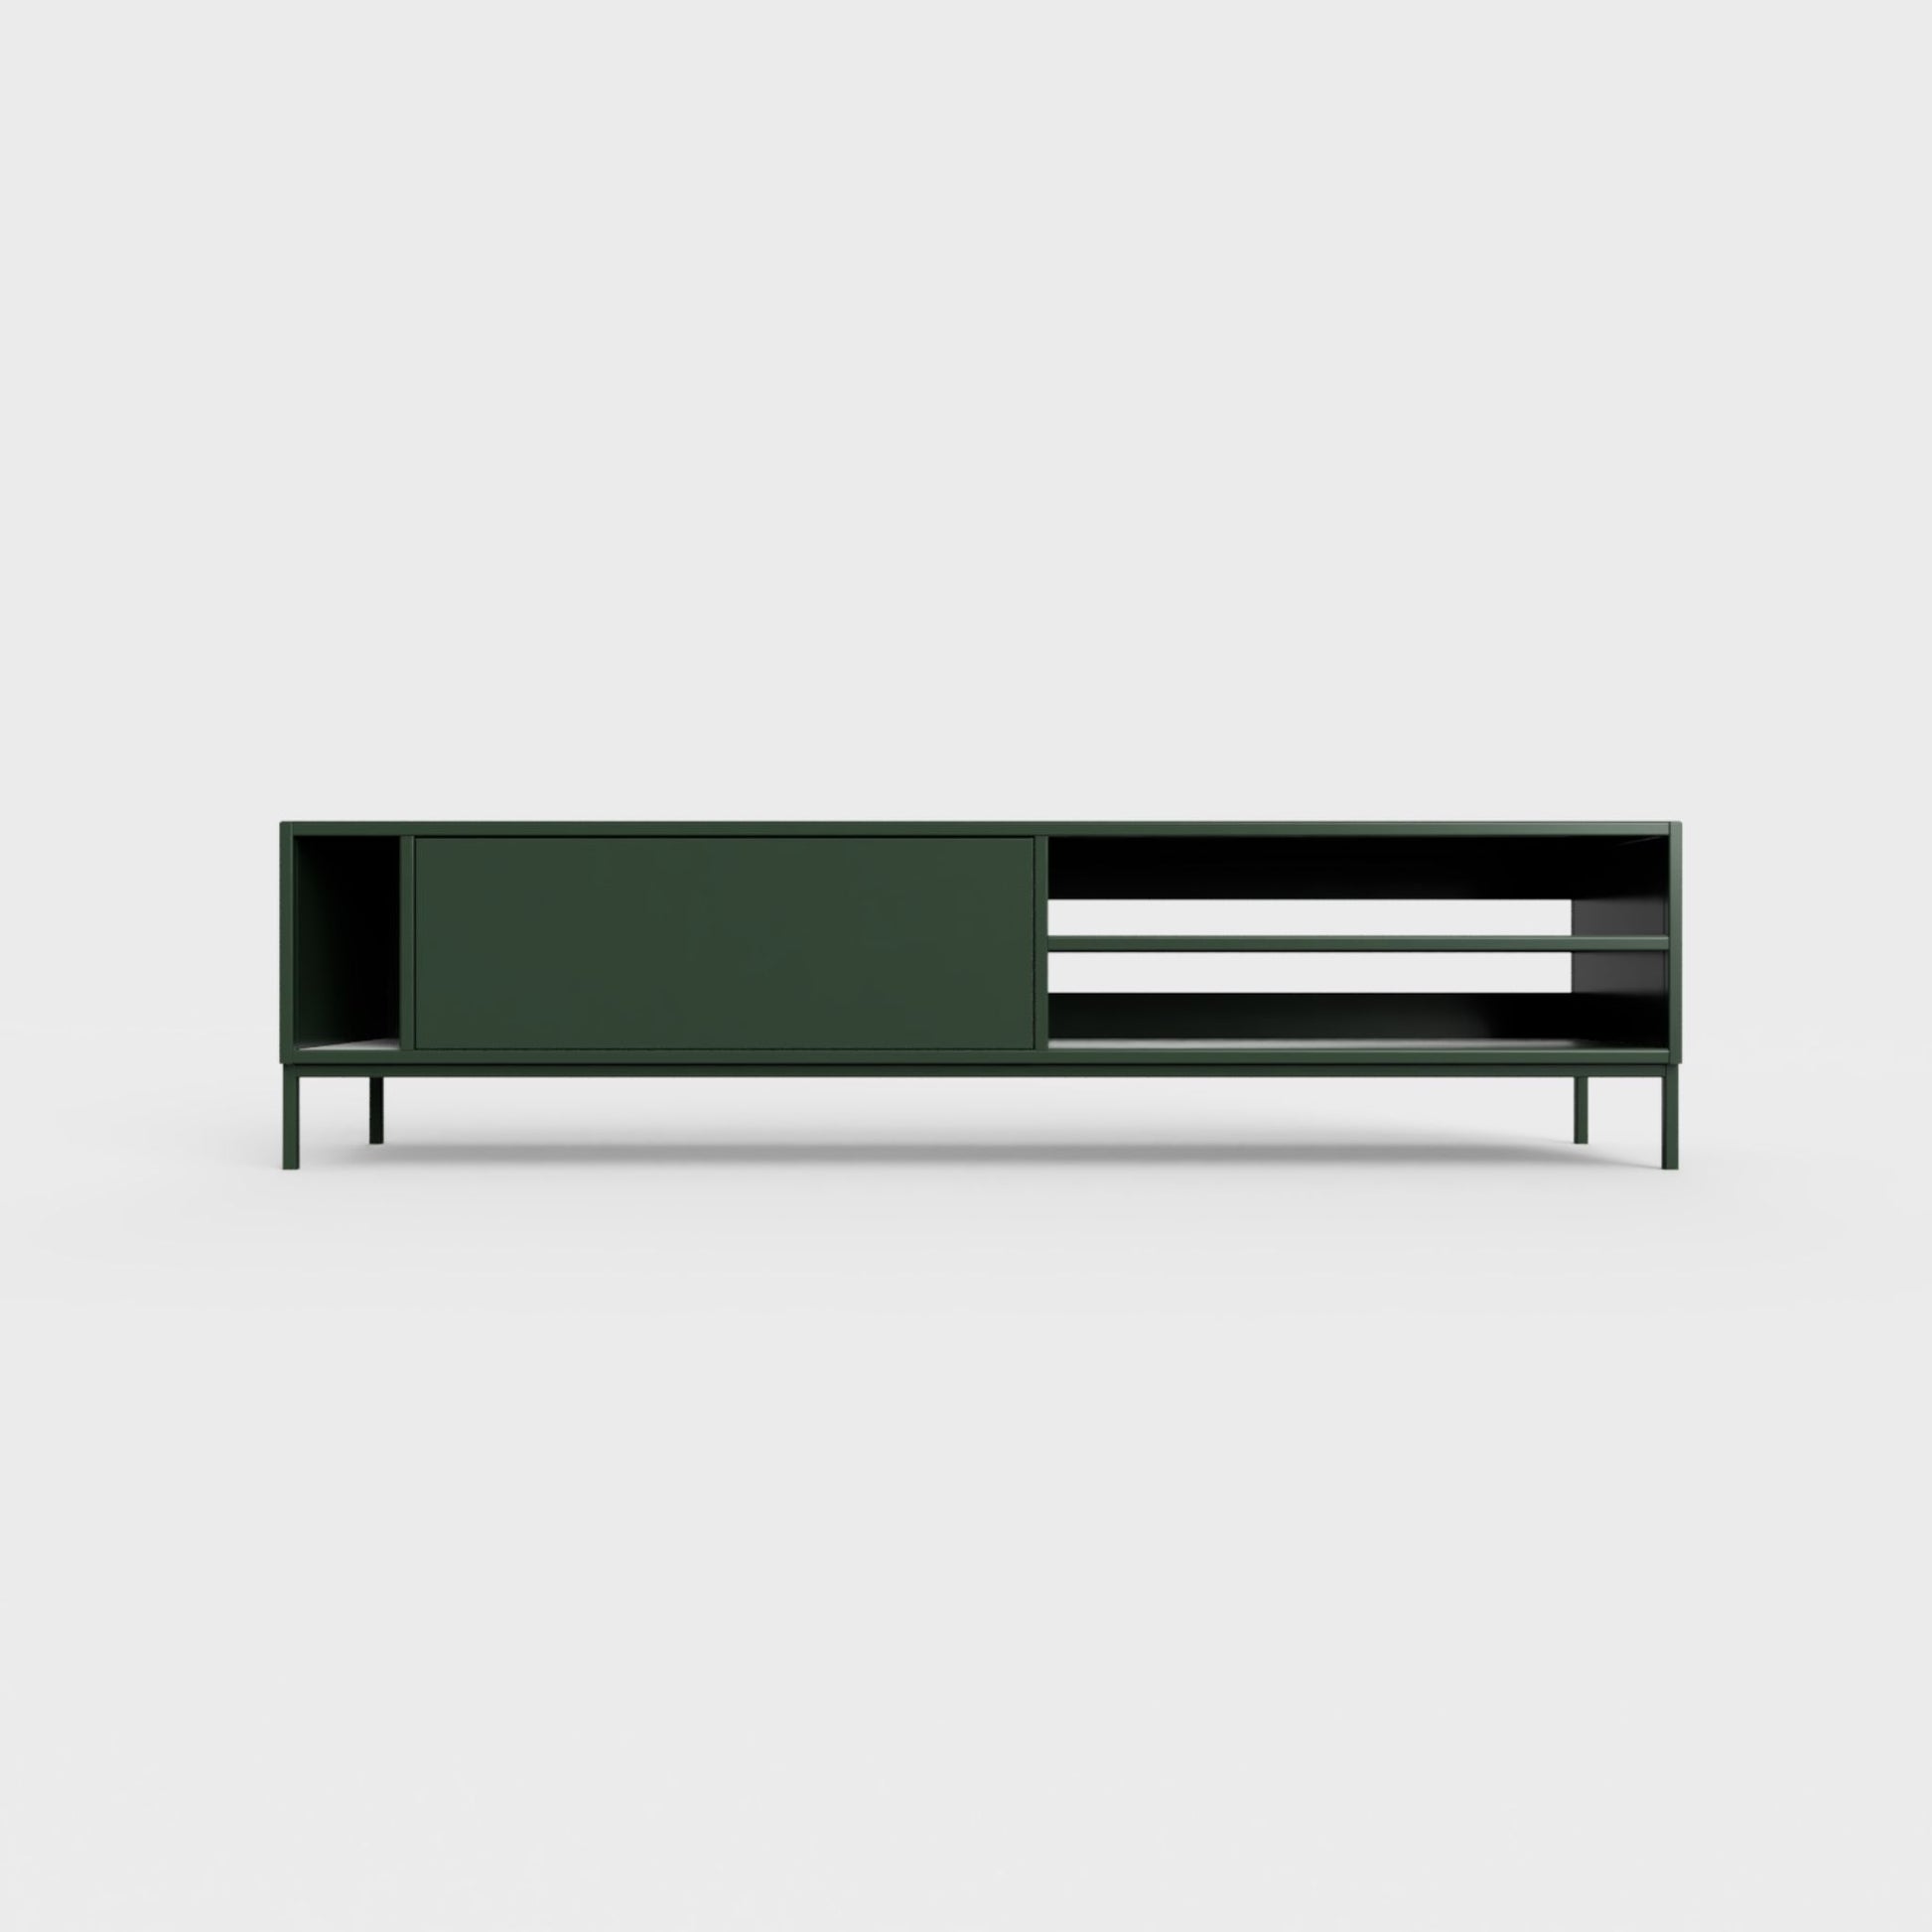 Prunus 03 Lowboard in bottle green color, powder-coated steel, elegant and modern piece of furniture for your living room